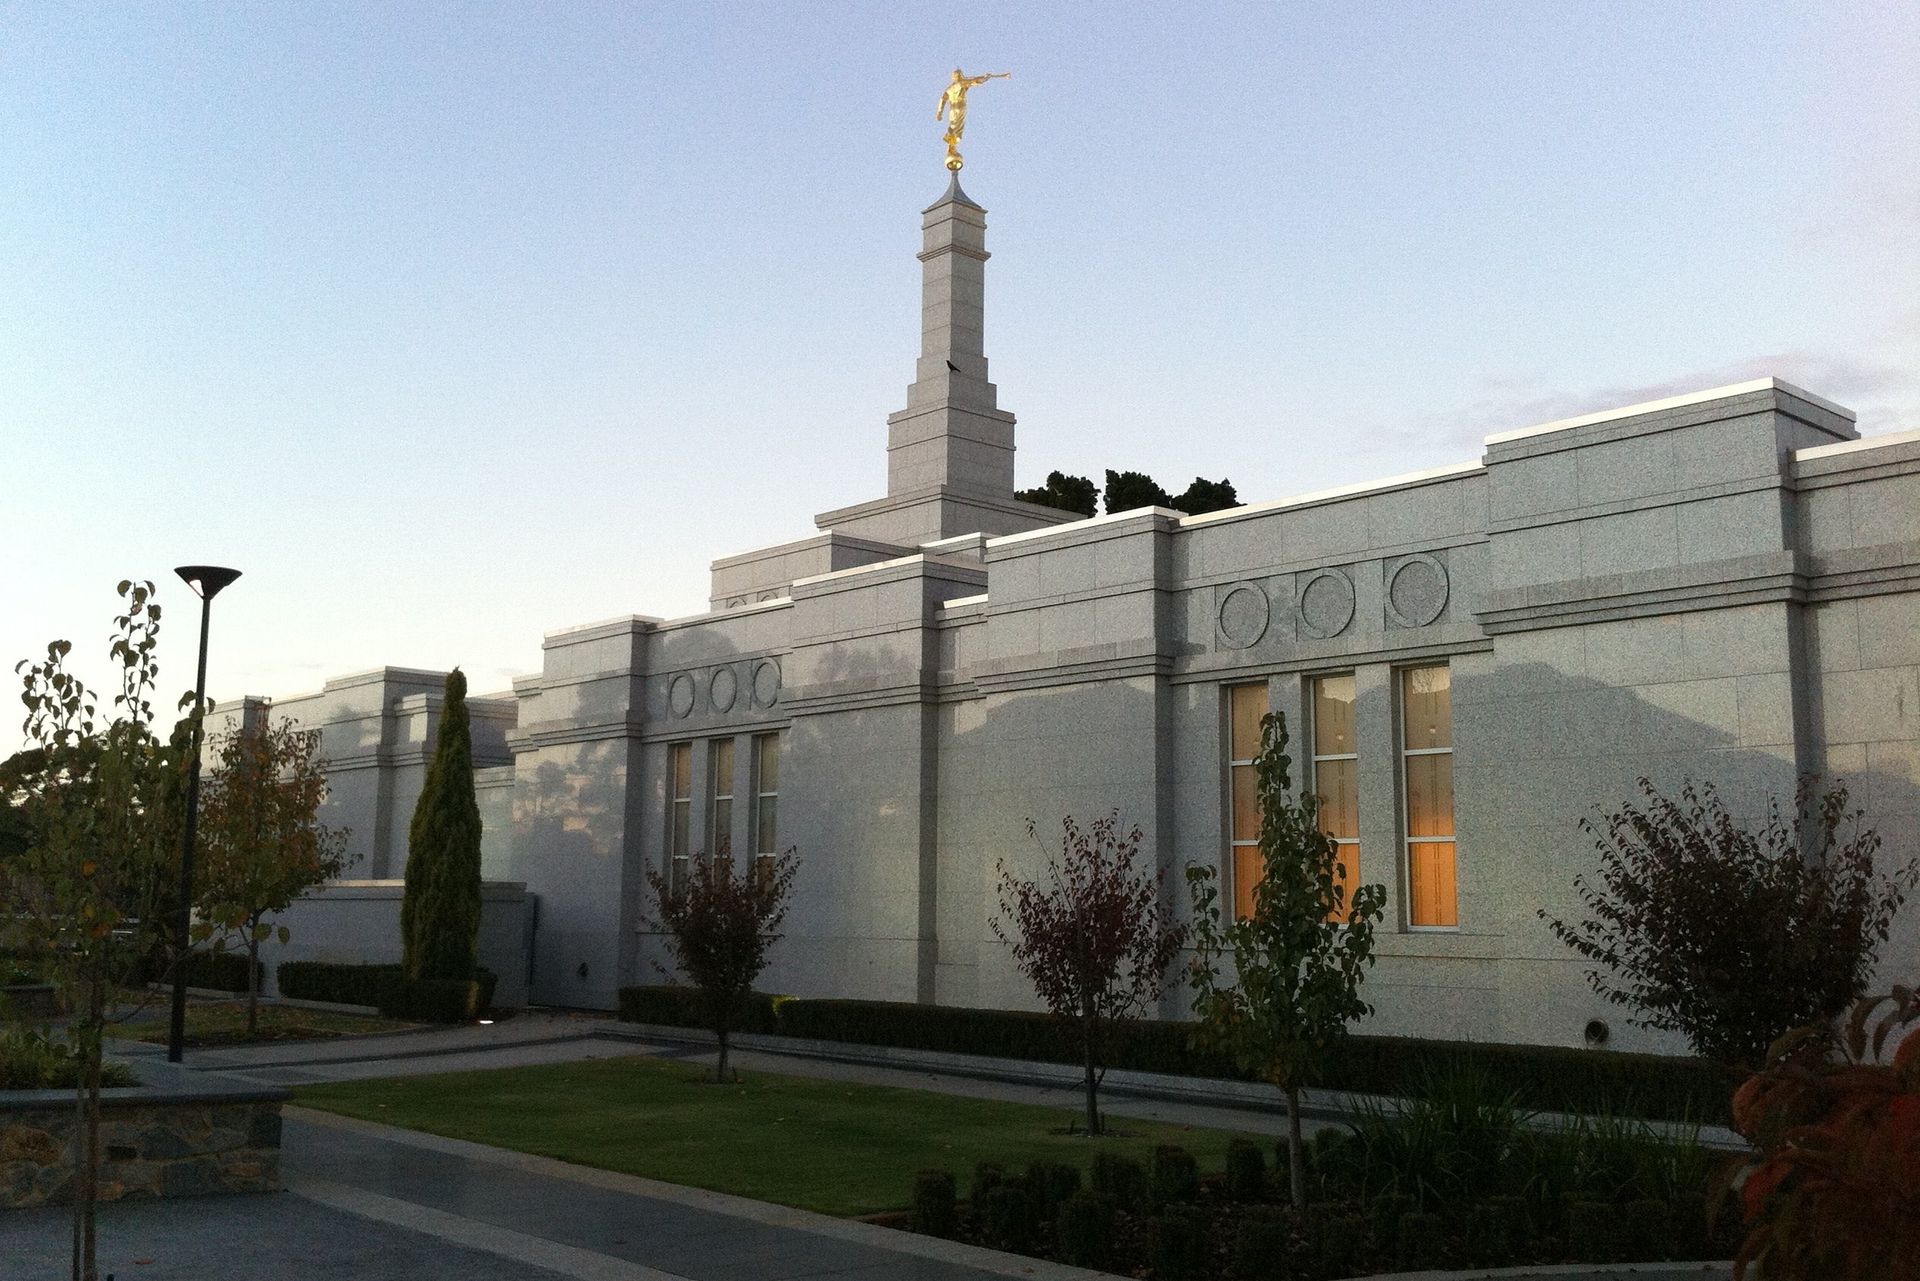 The Perth Australia Temple in the evening, including the spire and exterior of the temple.